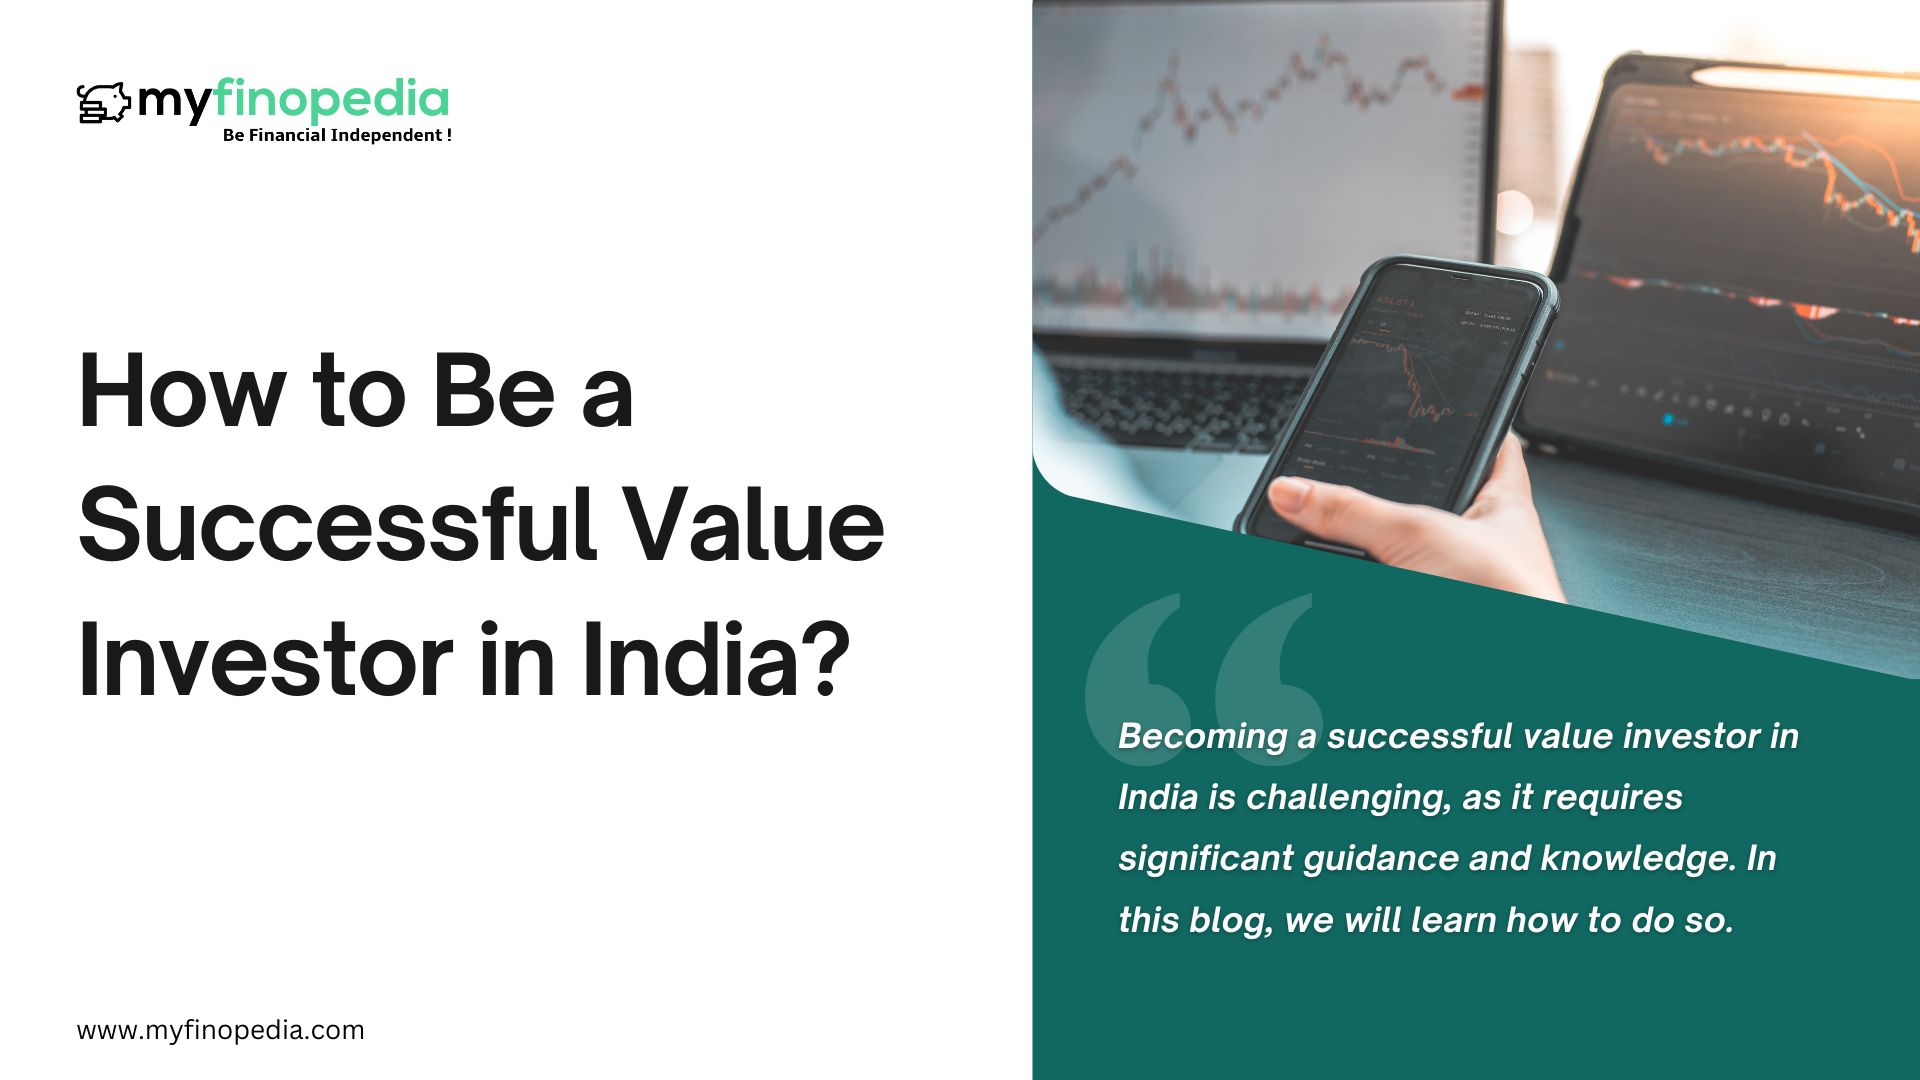 How to Be a Successful Value Investor in India